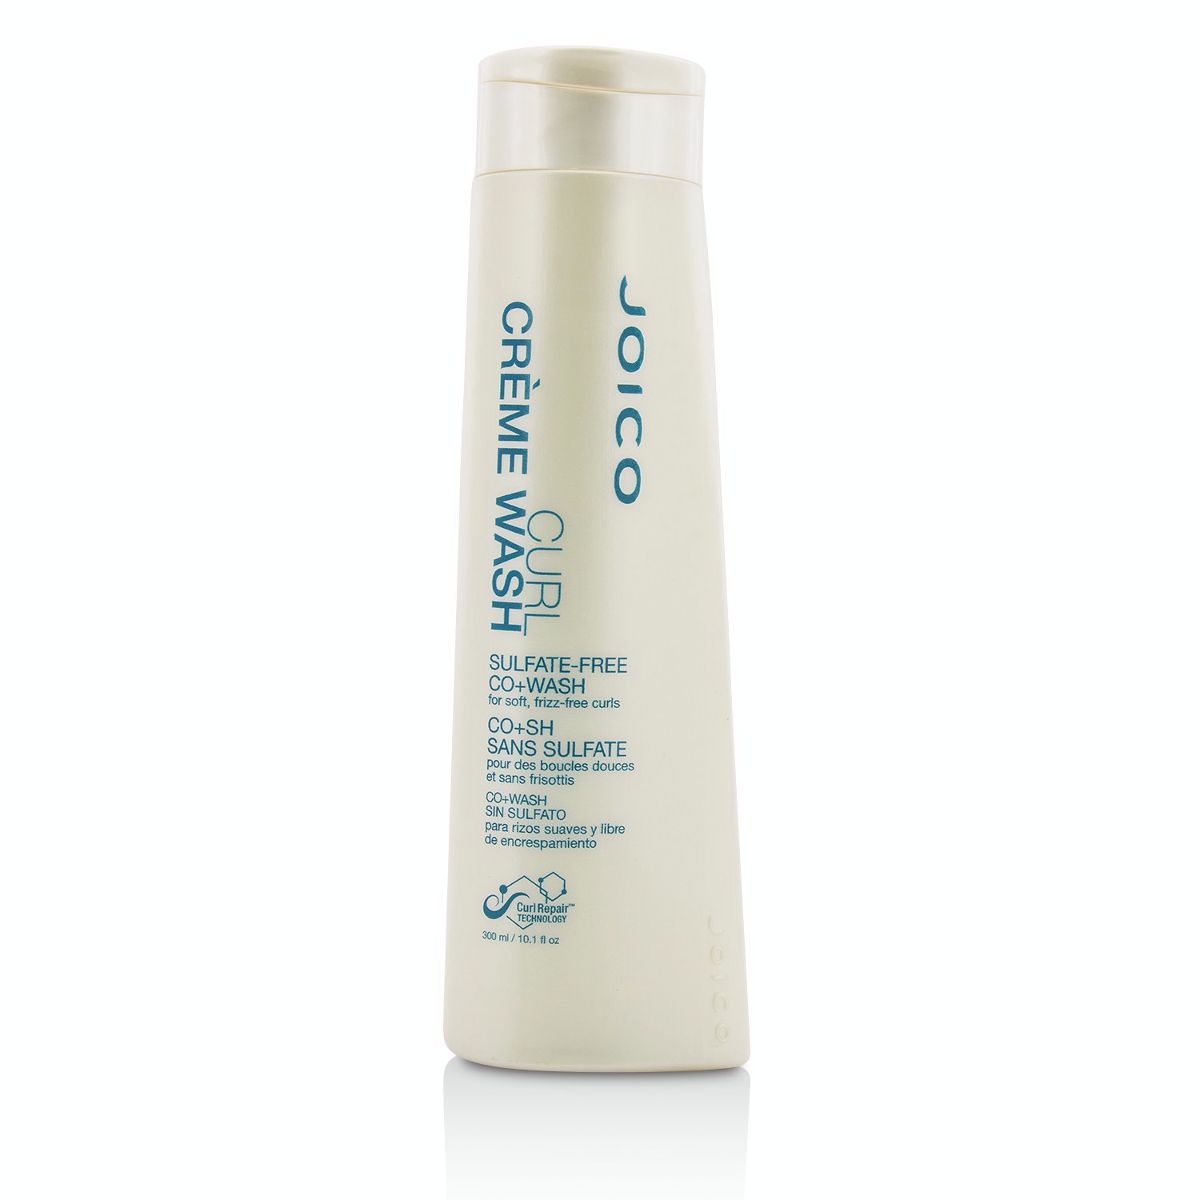 Curl Creme Wash Sulfate-Free Co+Wash (For Soft Frizz-Free Curls) Joico Image